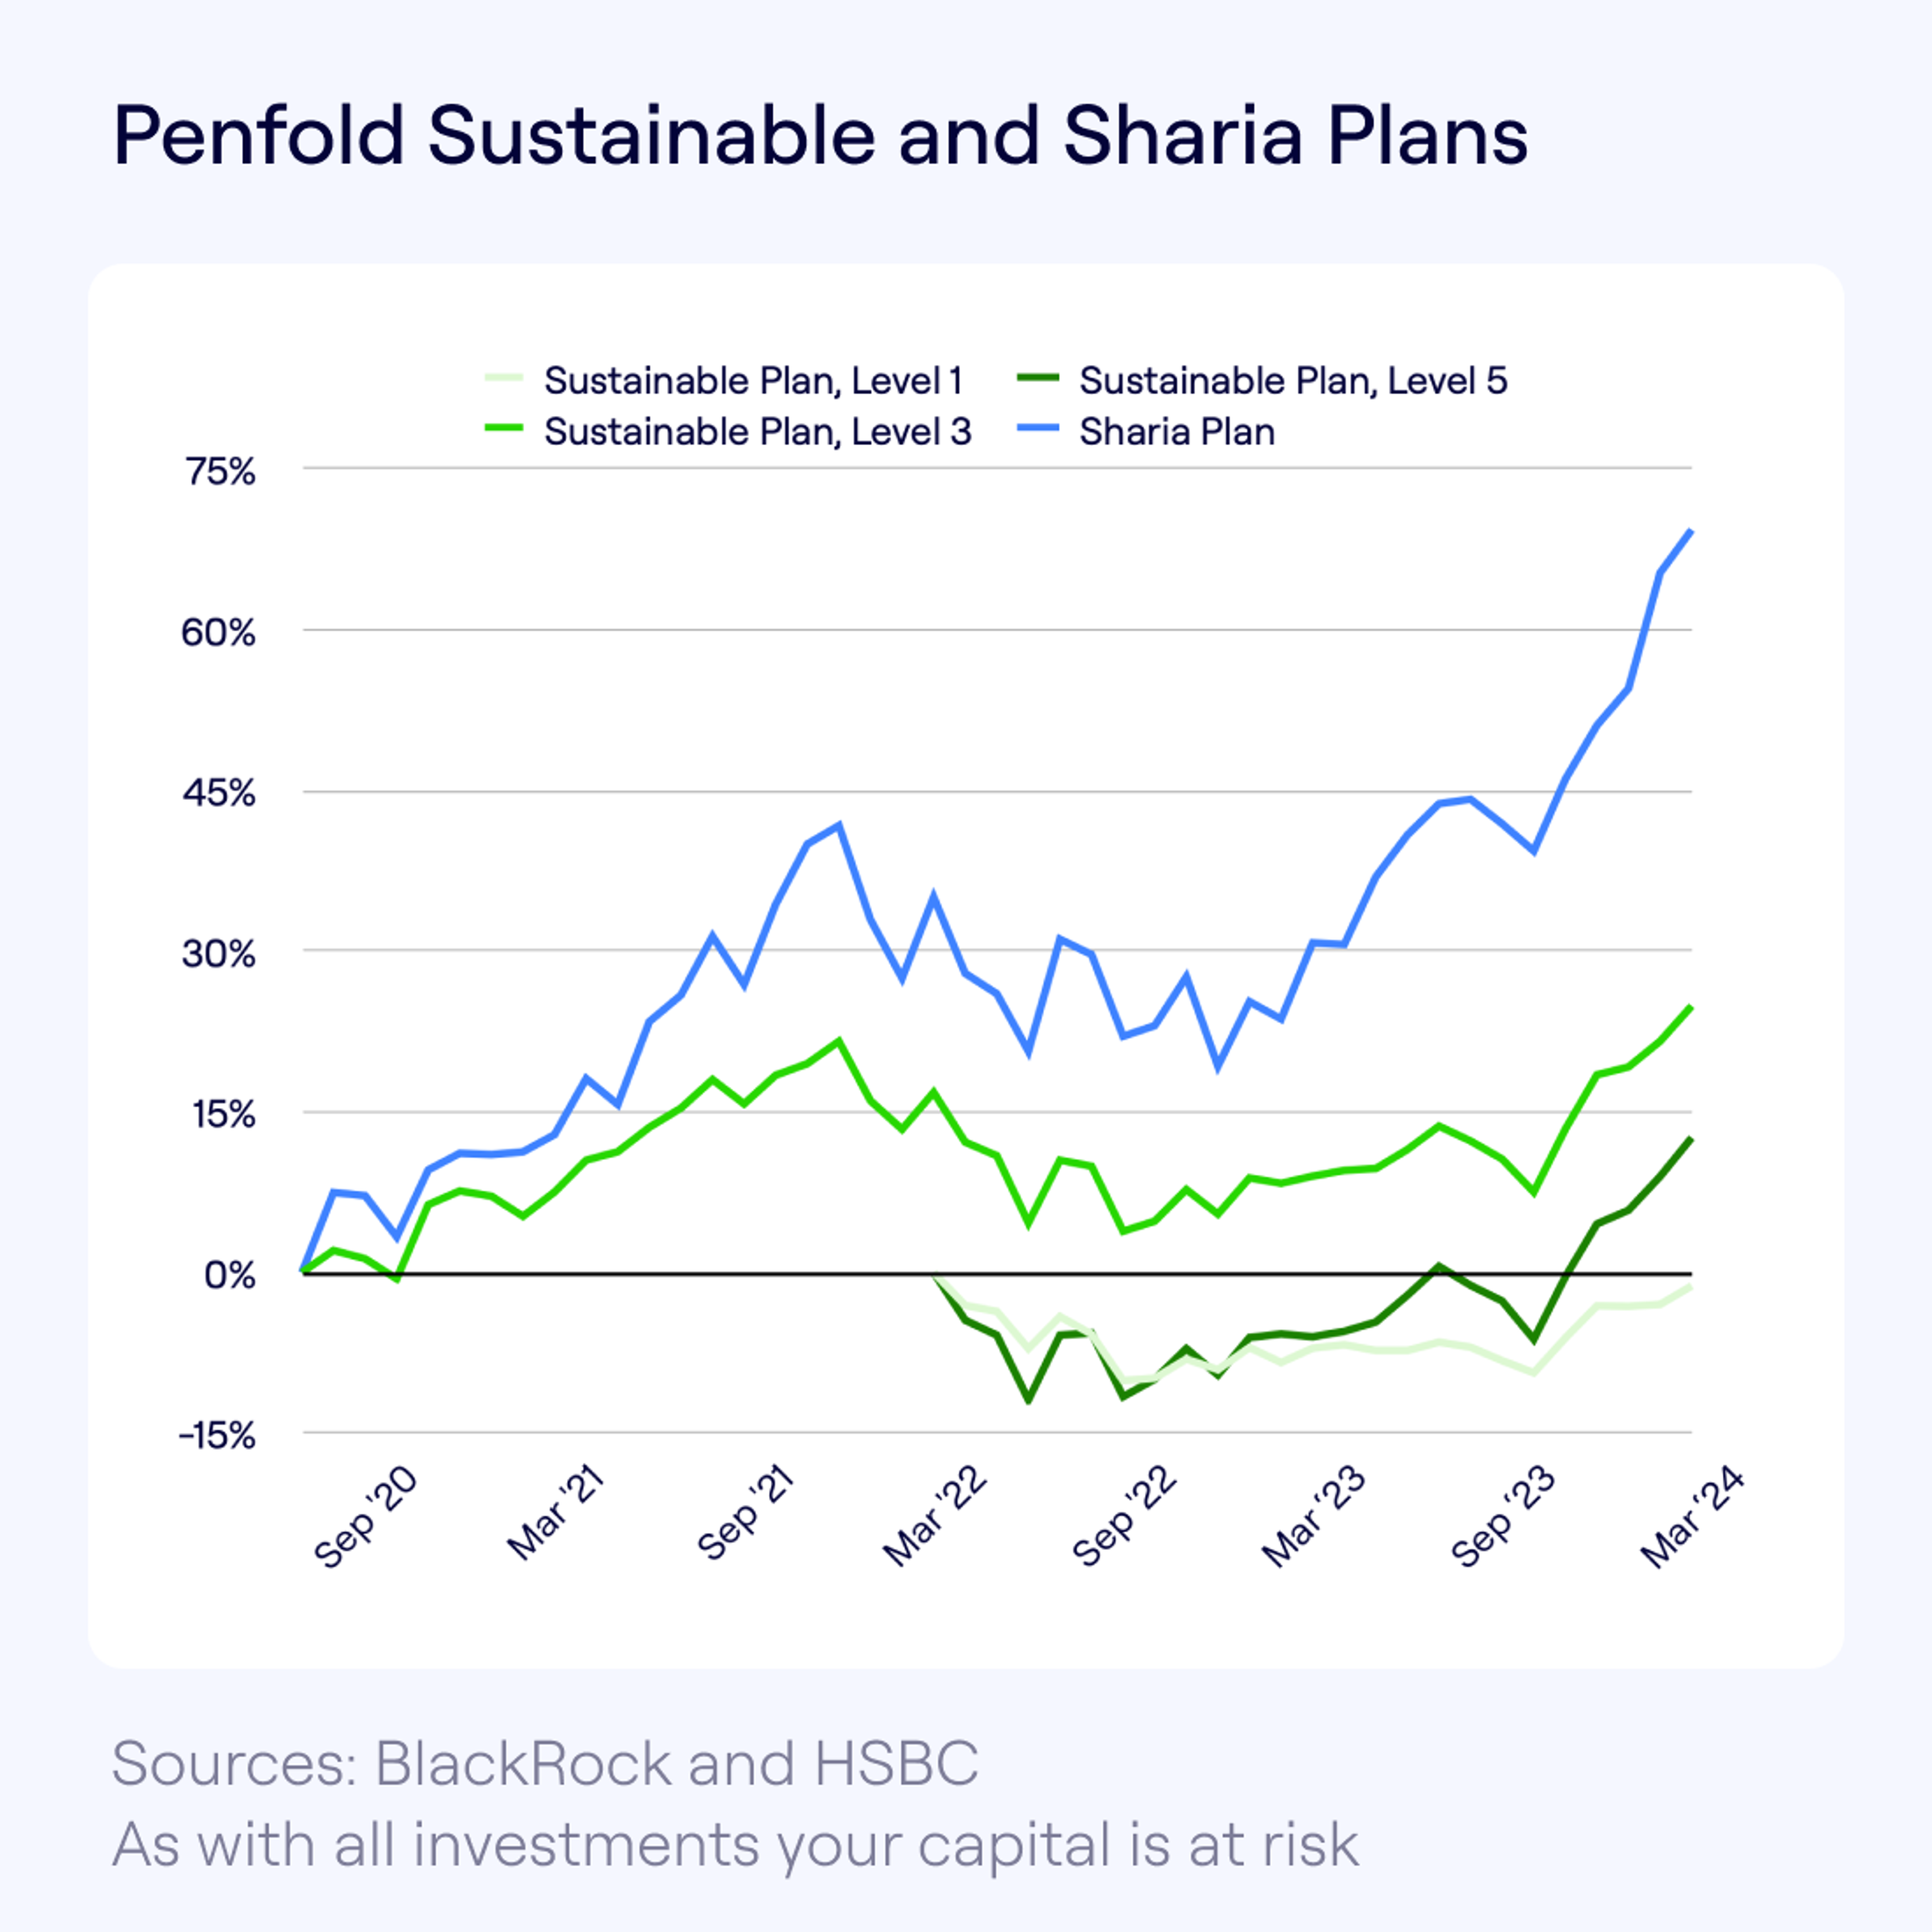 A multi-line graph titled "Penfold Sustainable and Sharia Plans," comparing the performance of different investment plans, including Sustainable Plan Levels 1, 3, 5, and a Sharia Plan from September 2020 to March 2024. The lines depict fluctuations with a general upward trend in recent months.